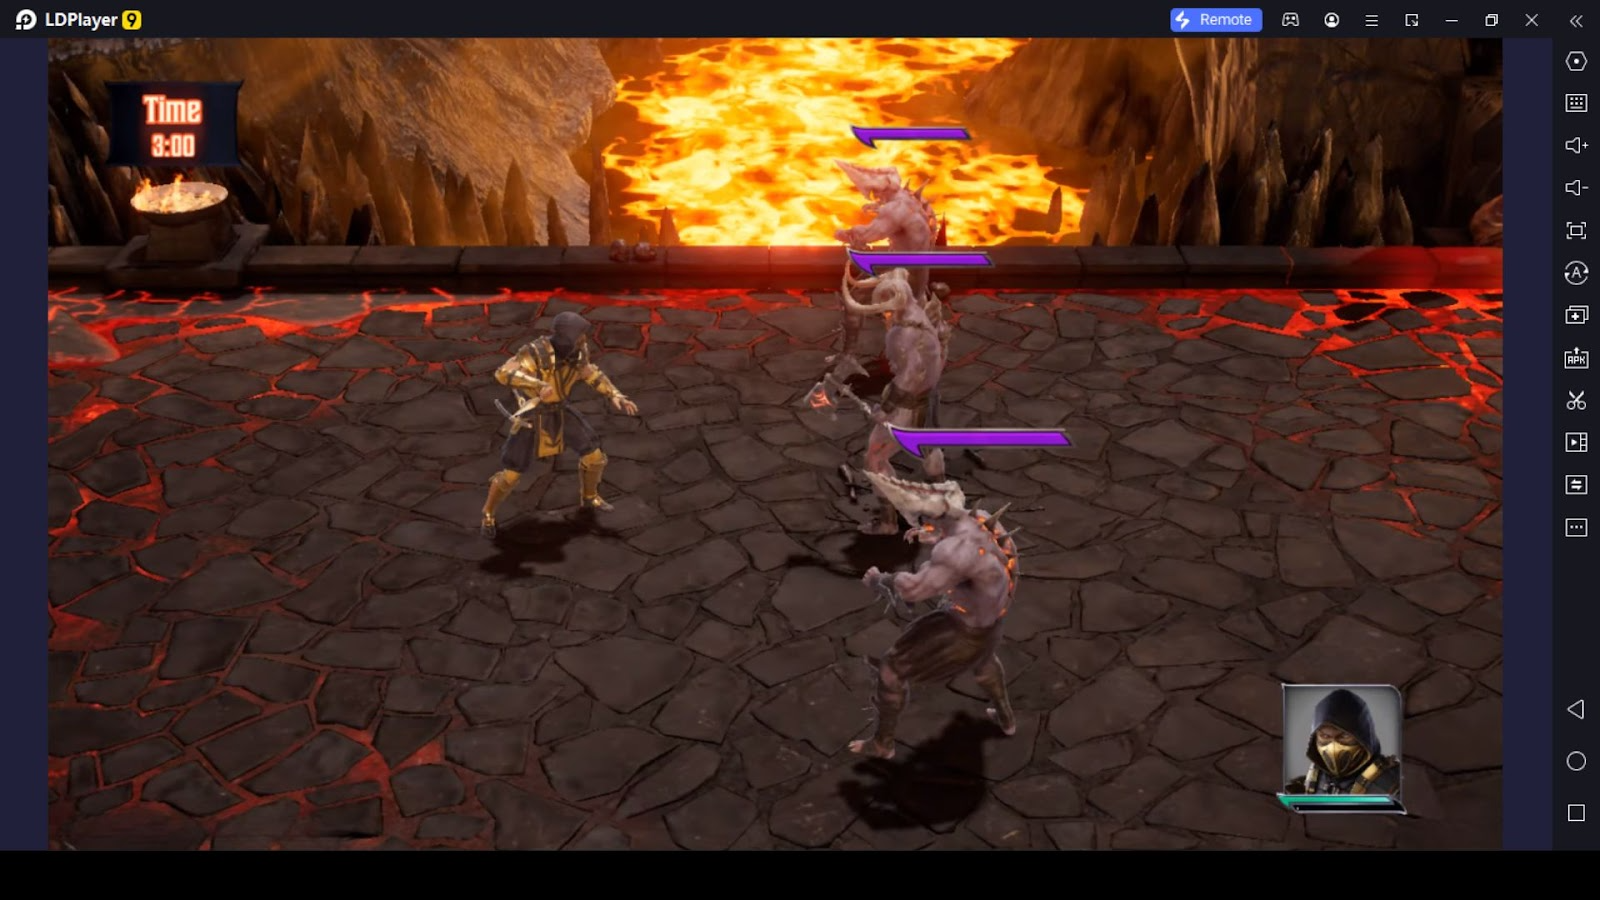 How to Install and Play Mortal Kombat: Onslaught on PC with BlueStacks